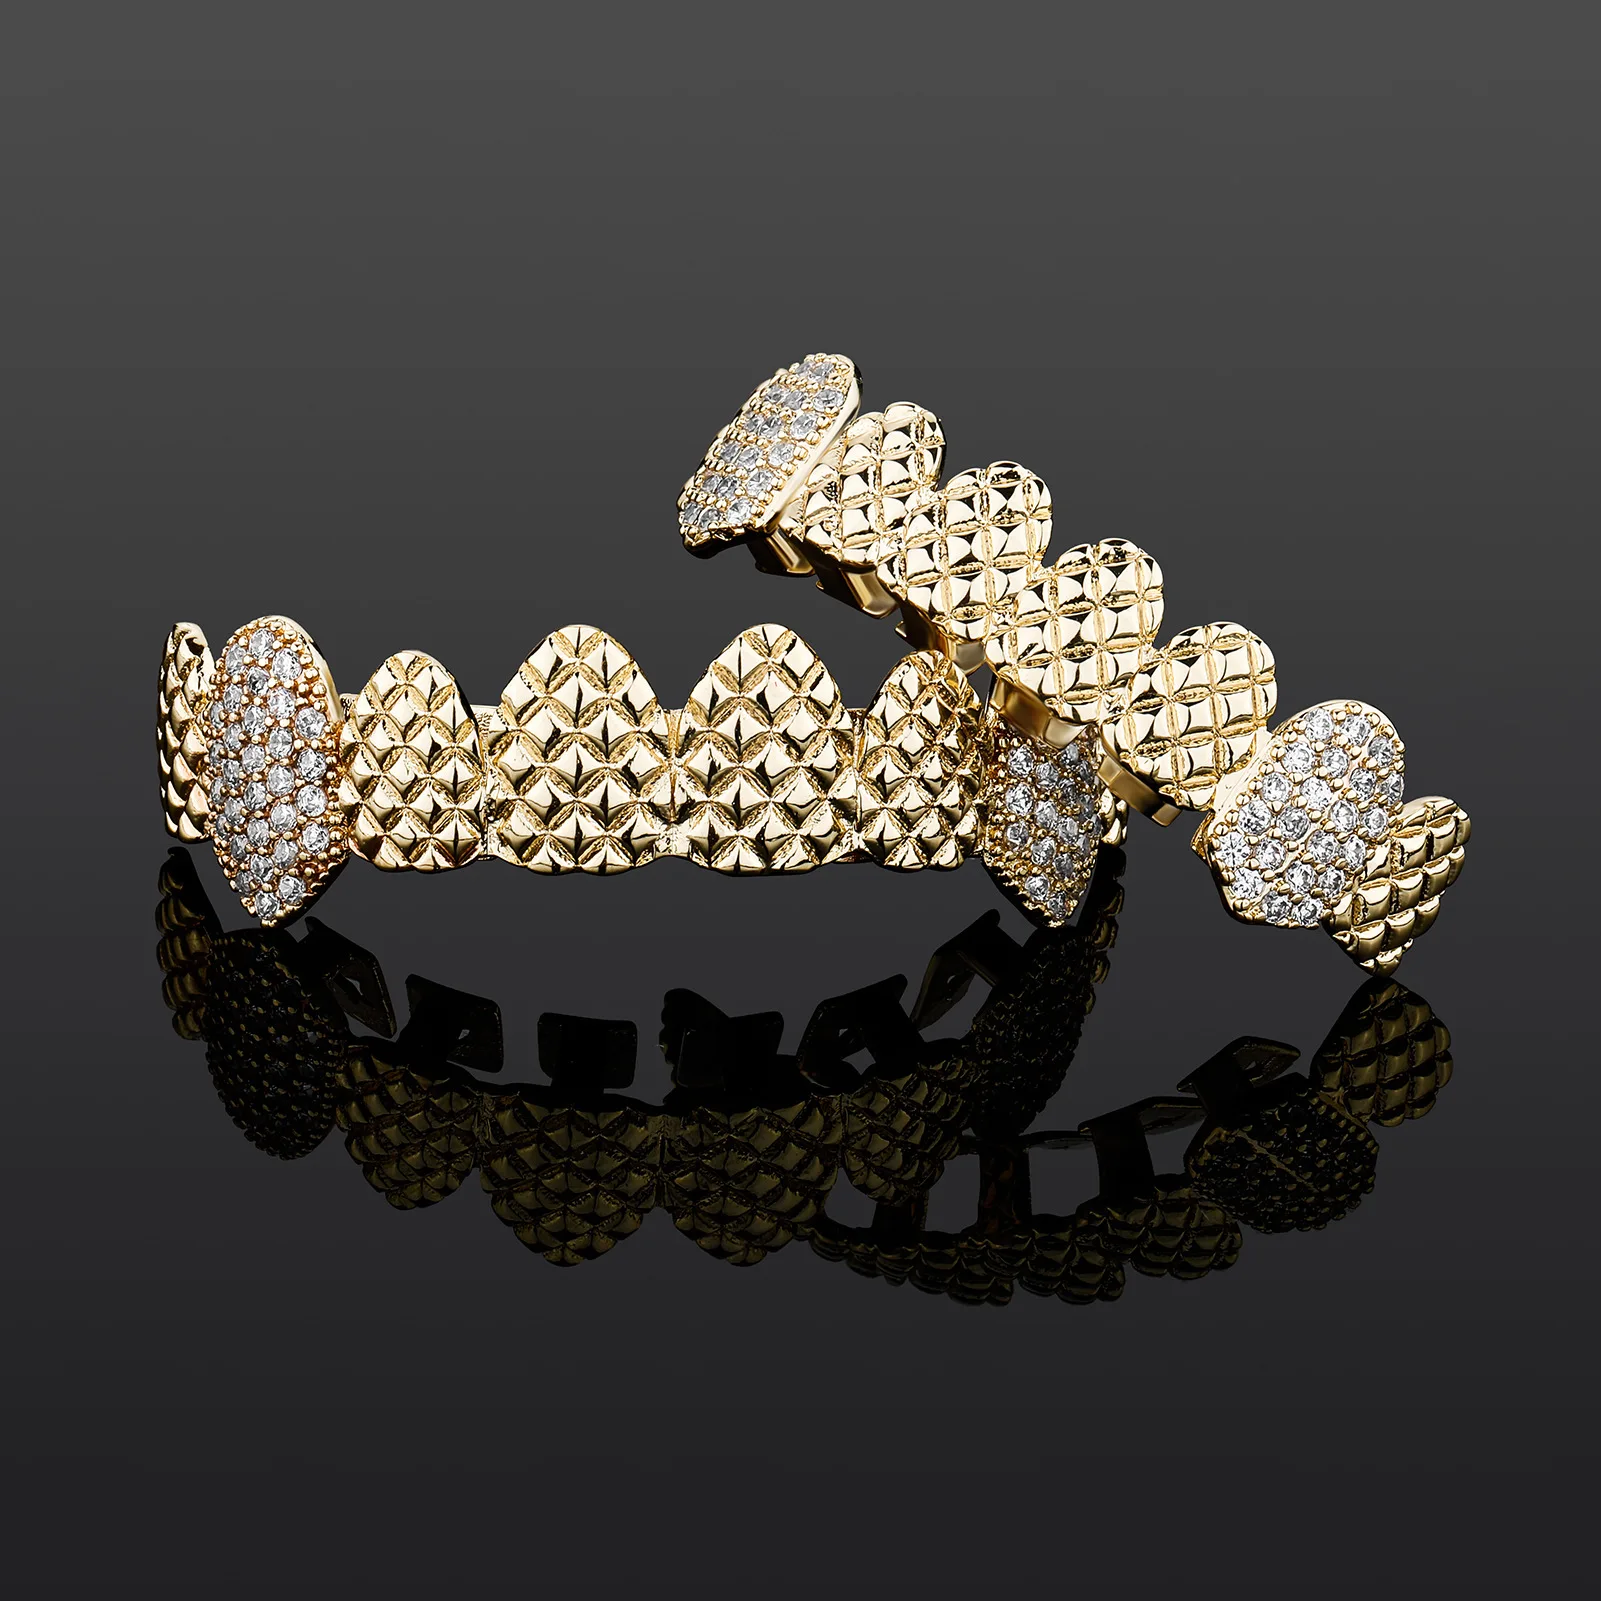 Smooth textured fangs set gold filled zirconium hip hop braces iced out grillz jewelry